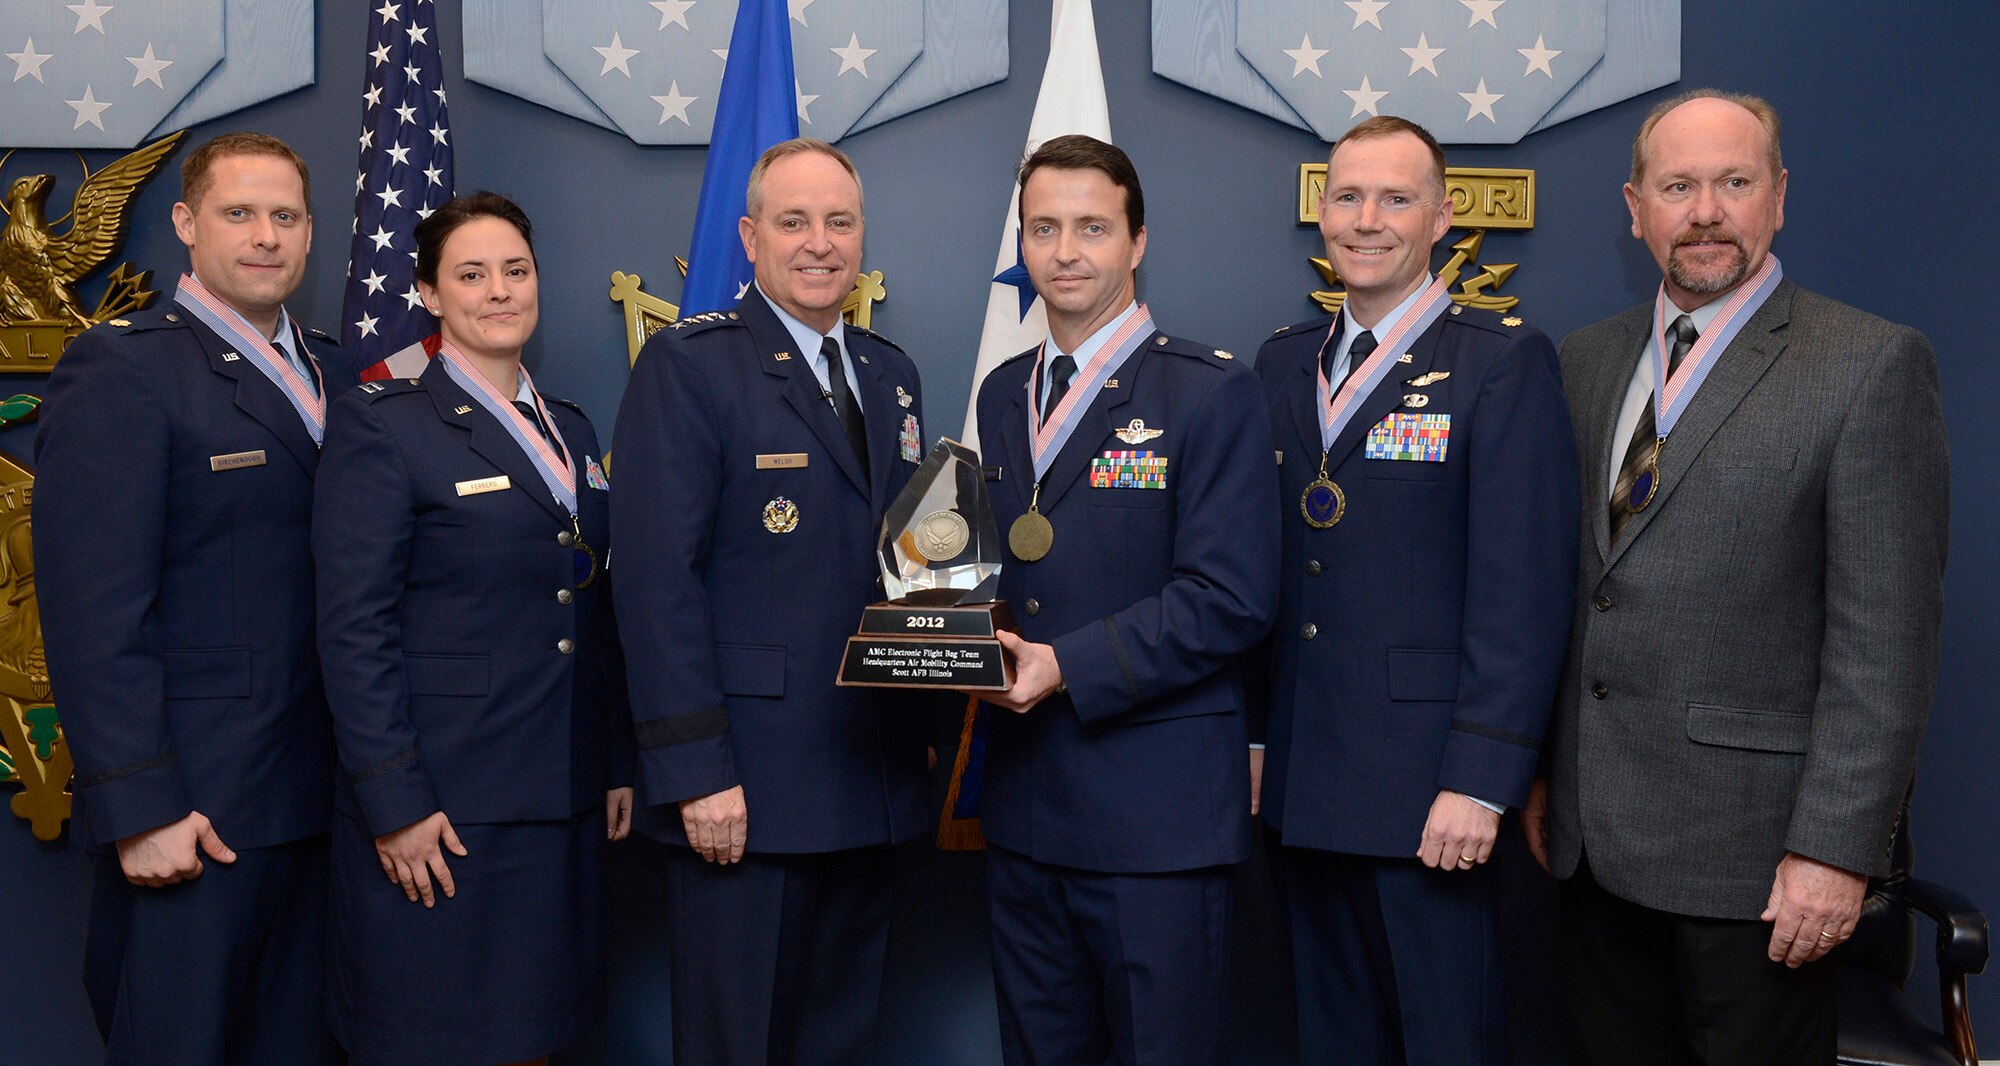 Members of the winning team of the 2012 Chief of Staff Team Excellence Award is the AMC Electronic Flight Bag Team From Scott Air Force Base, Ill., are congratulated by Air Force Chief of Staff Gen. Mark A. Welsh III in a Pentagon ceremony on Nov. 27, 2012.  (U.S. Air Force photo/Scott M. Ash)